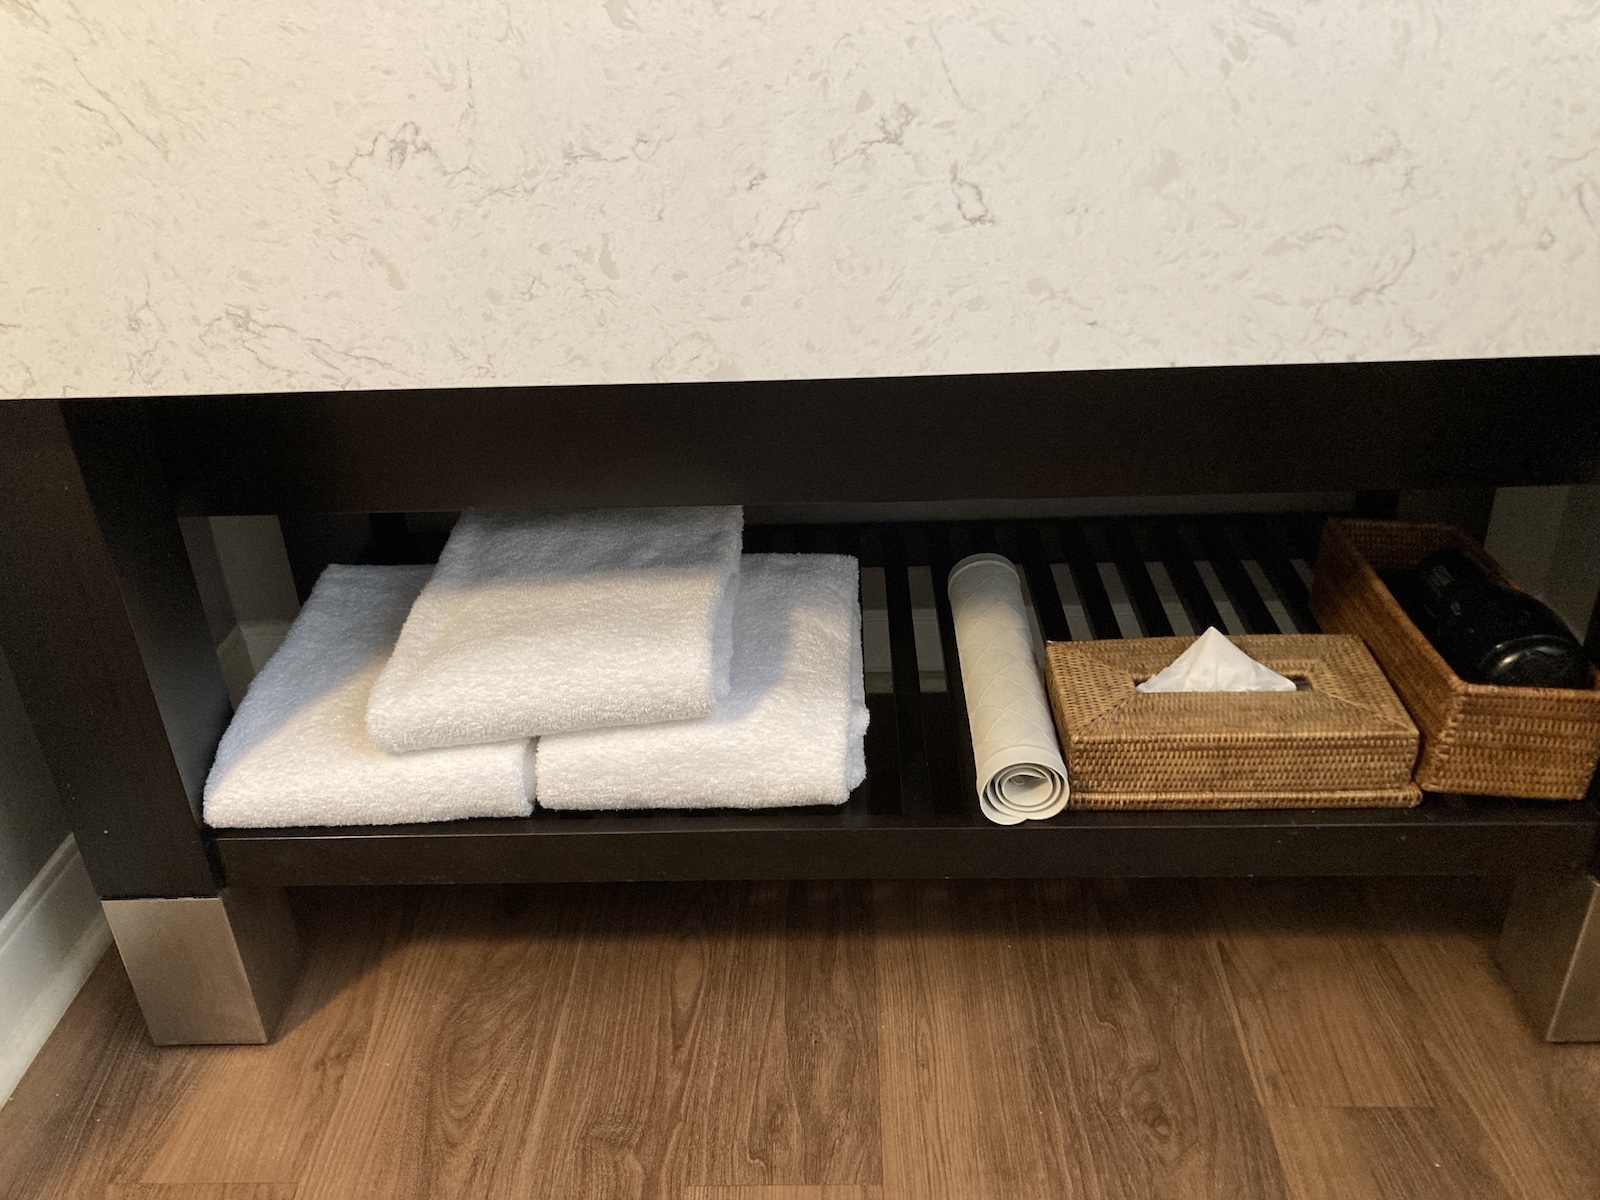 Image shows towels, rug, and hair dryer located on a shelf under a sink